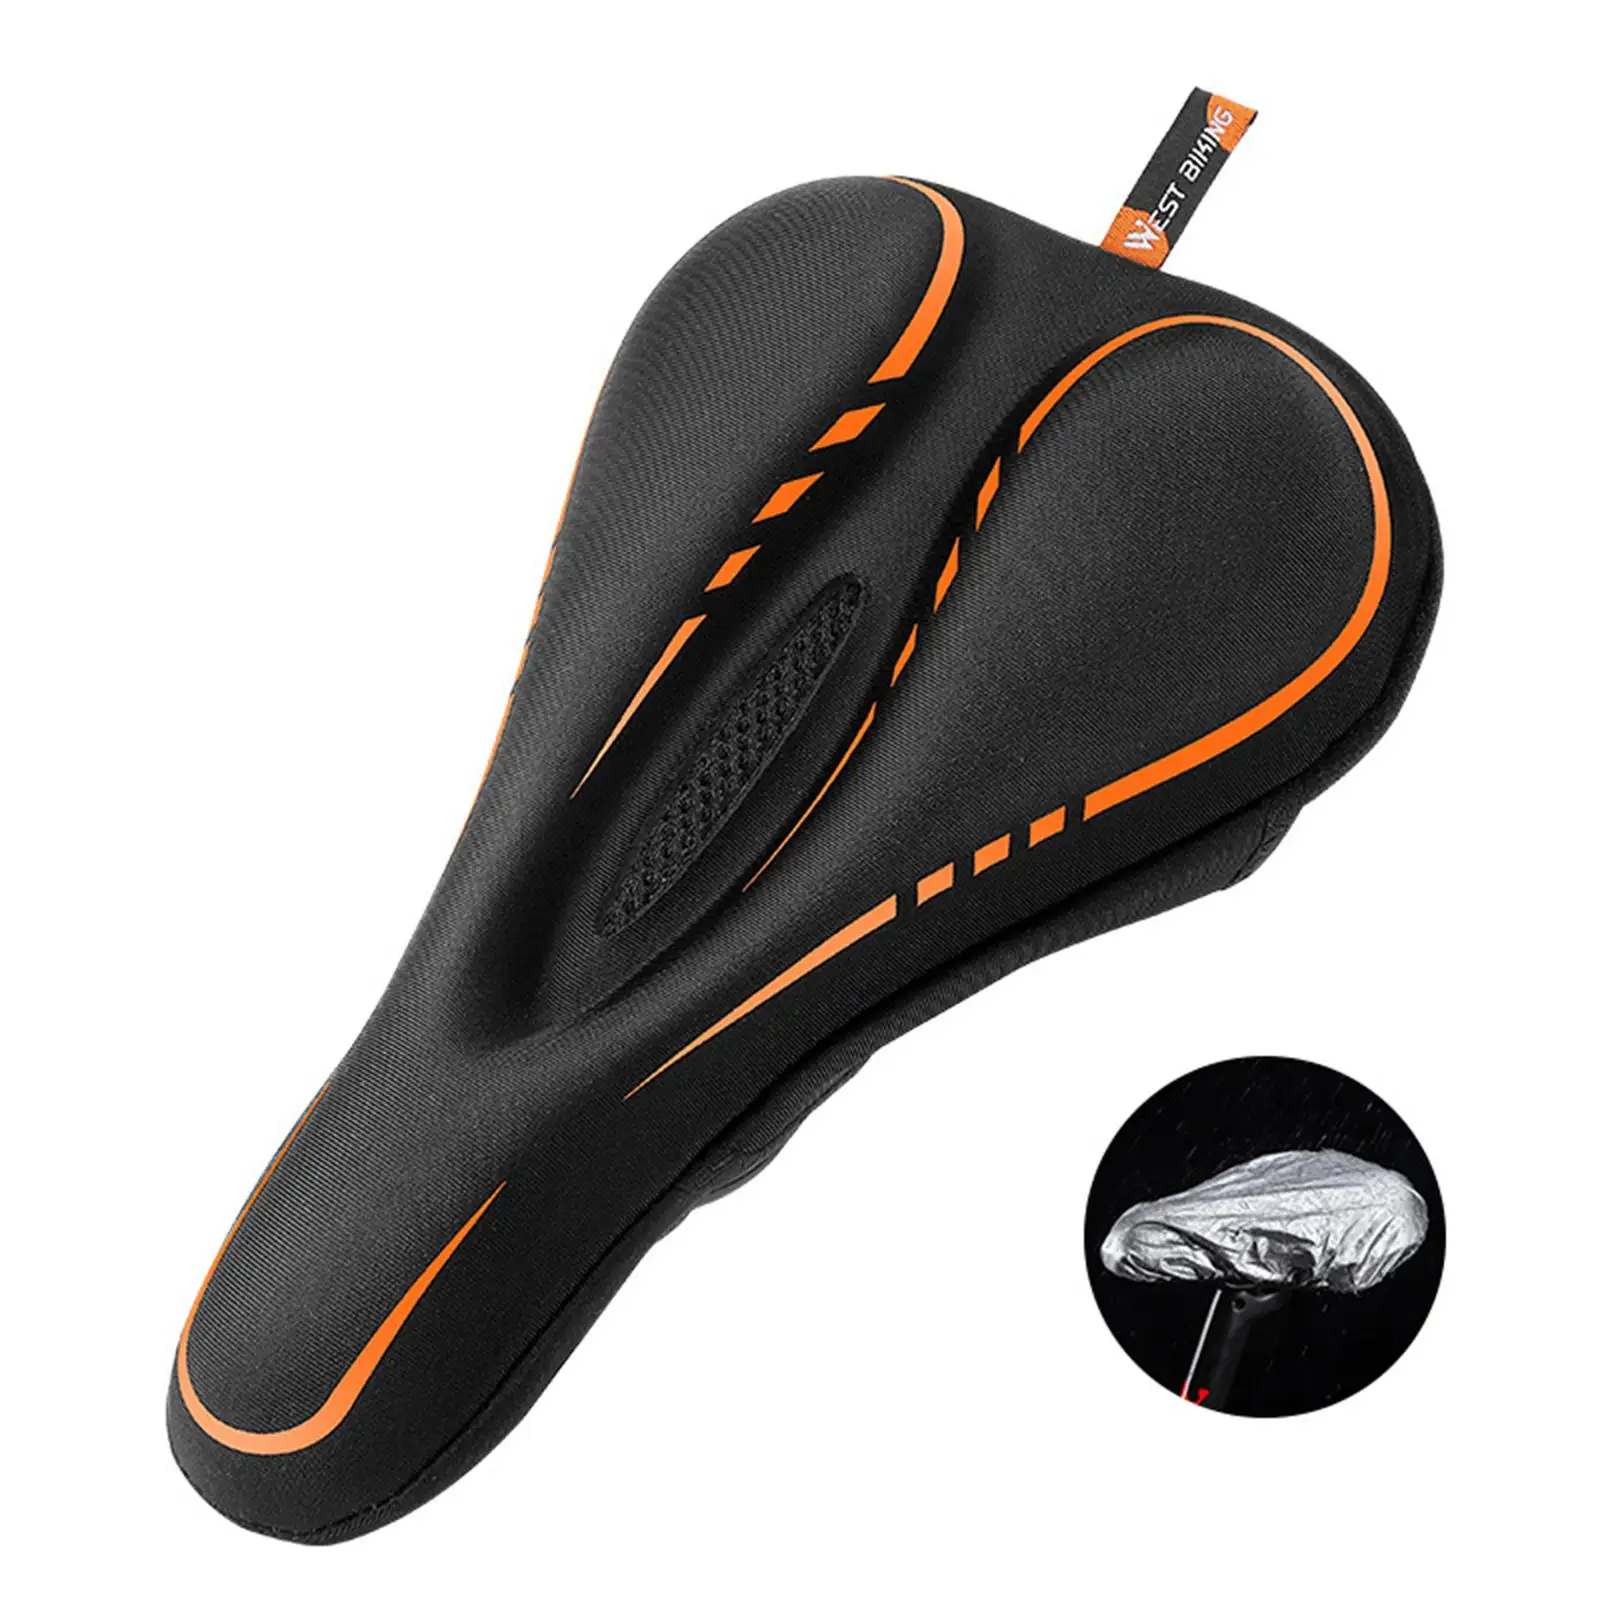 Comfortable Bike Saddle Cushion Pad Non Slip Rain Cover Storage Shockproof Breathable for Mountain Road Bike Cycling Accessories